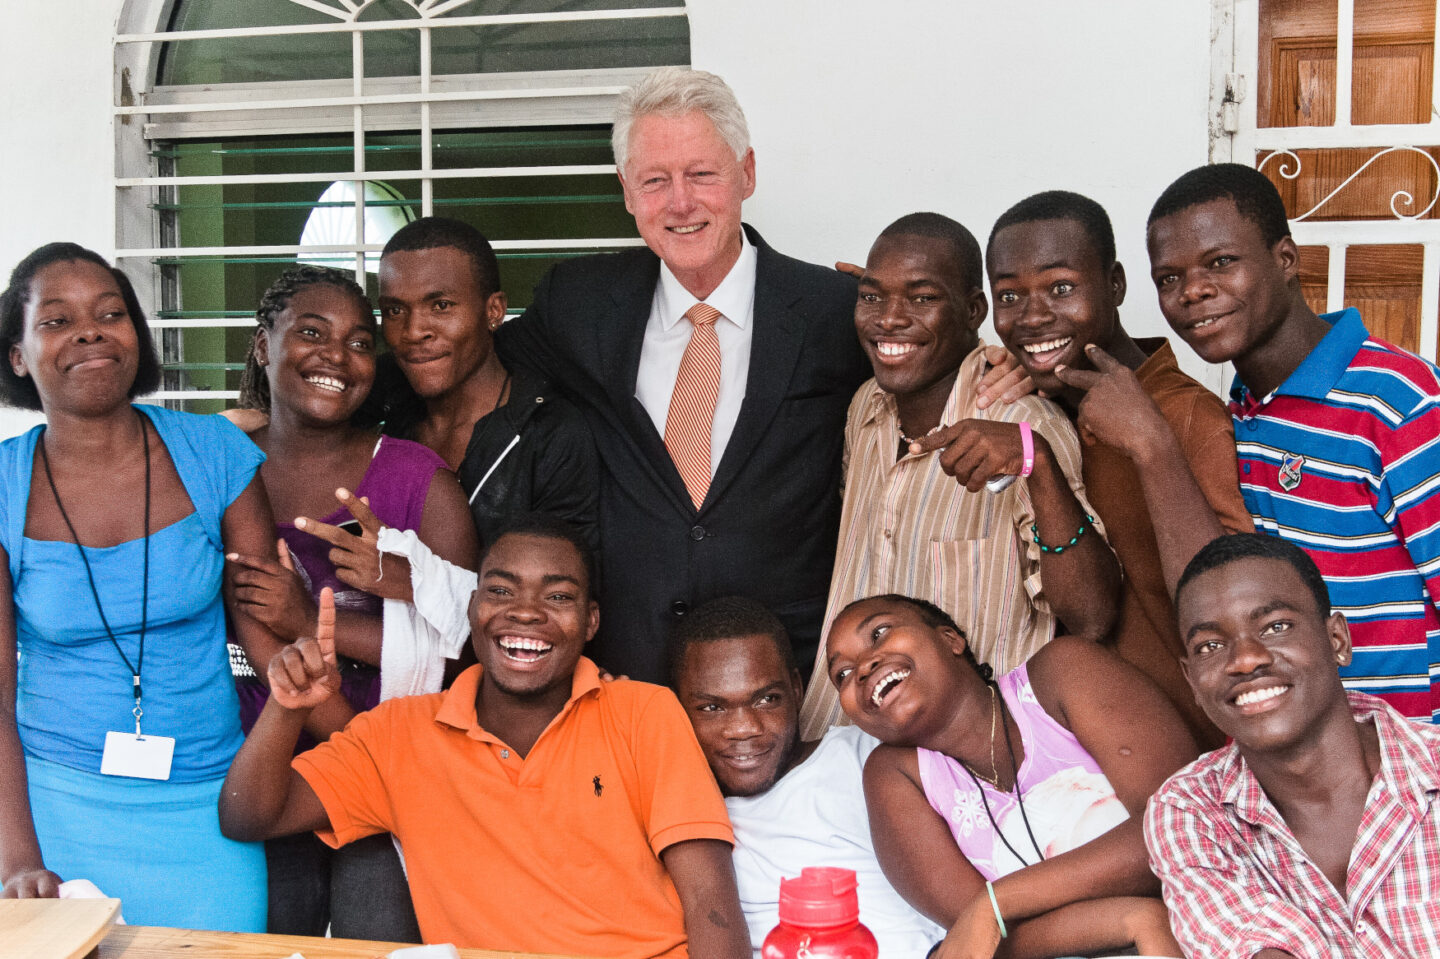 President Clinton stands with a group of individuals